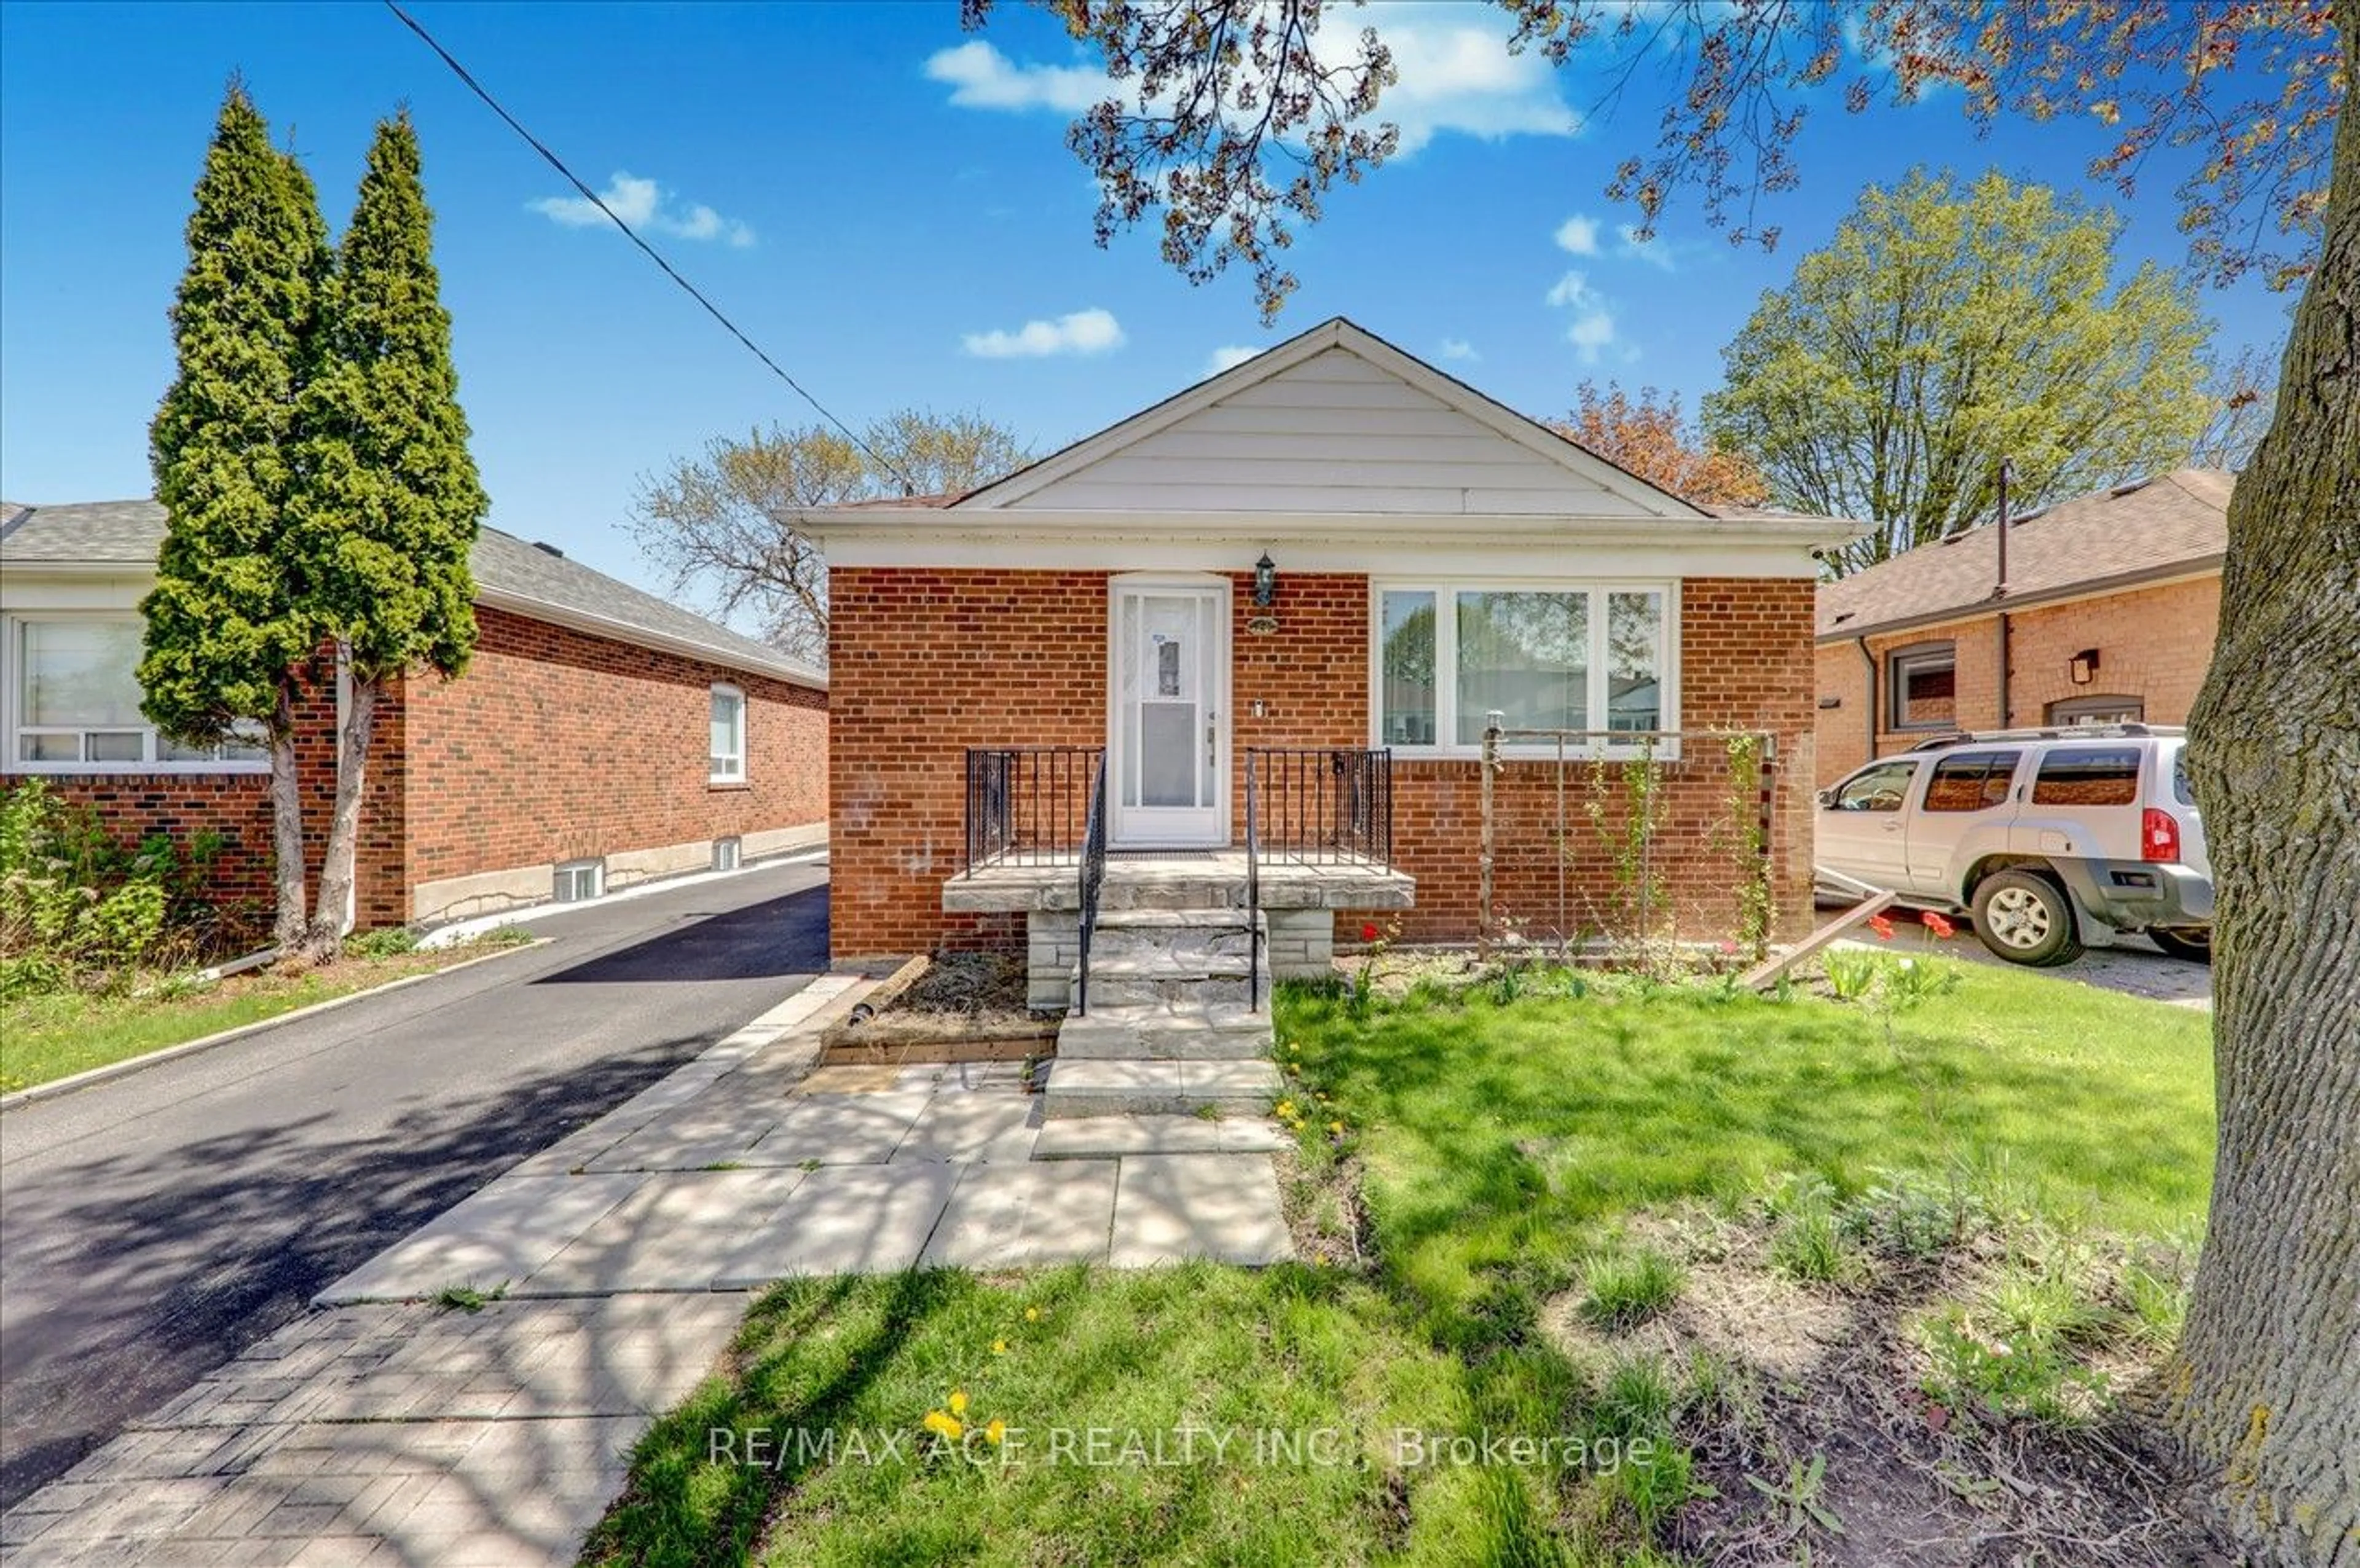 Home with brick exterior material for 127 Lilian Dr, Toronto Ontario M1R 3W6